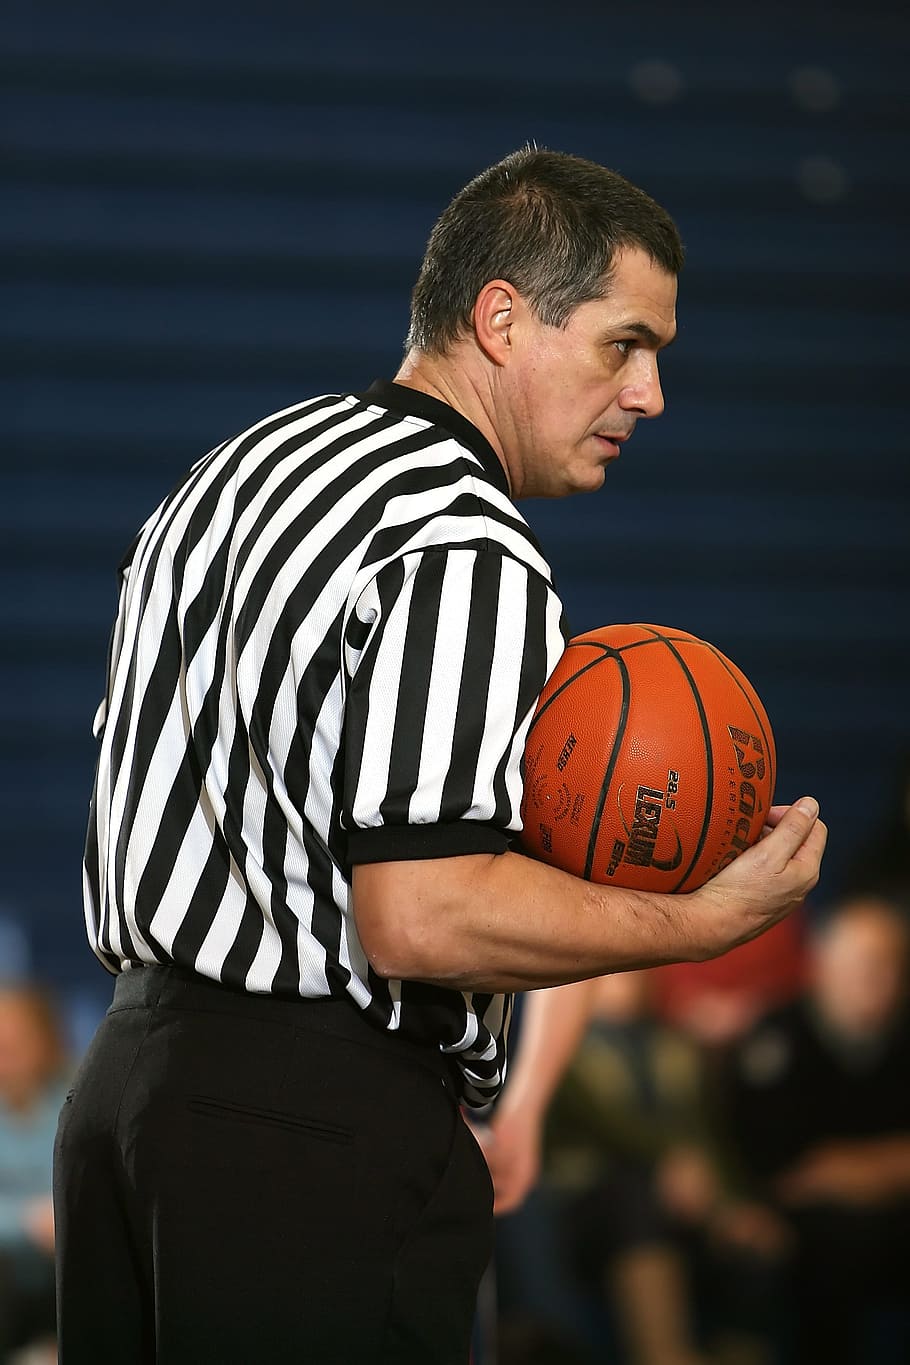 HD wallpaper: Basketball, Referee, Striped, Stripes, sports official, game  | Wallpaper Flare